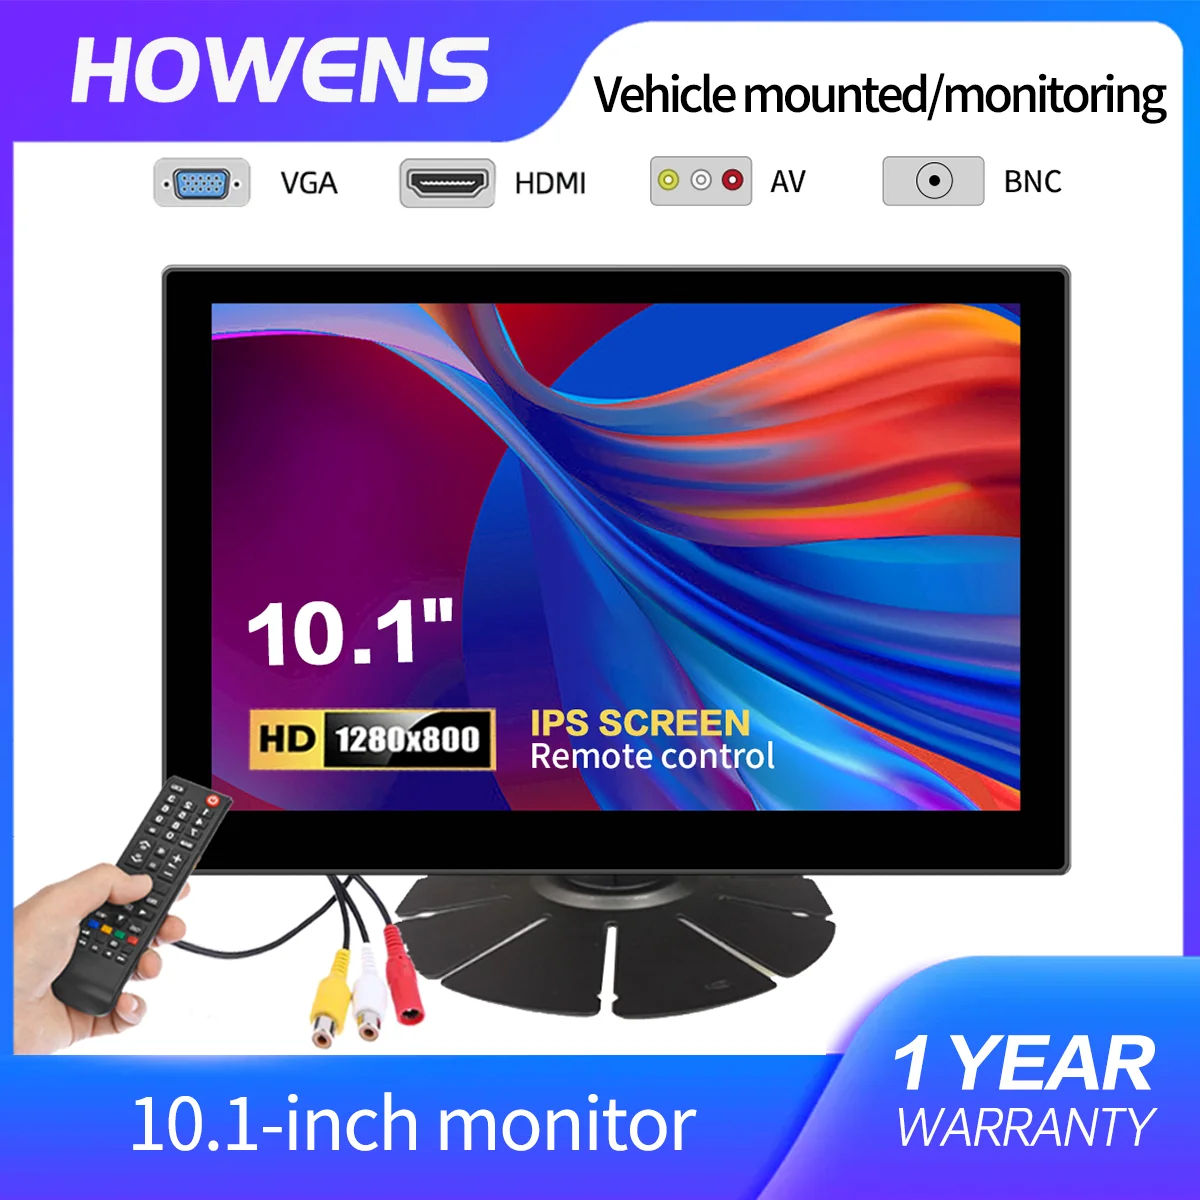 

10.1 inch Monitor FHD 1280*800 Industrial Display Suitable for Cashier Monitoring CCTV Support Computer VAG LCD HDMI AV BNC DVI